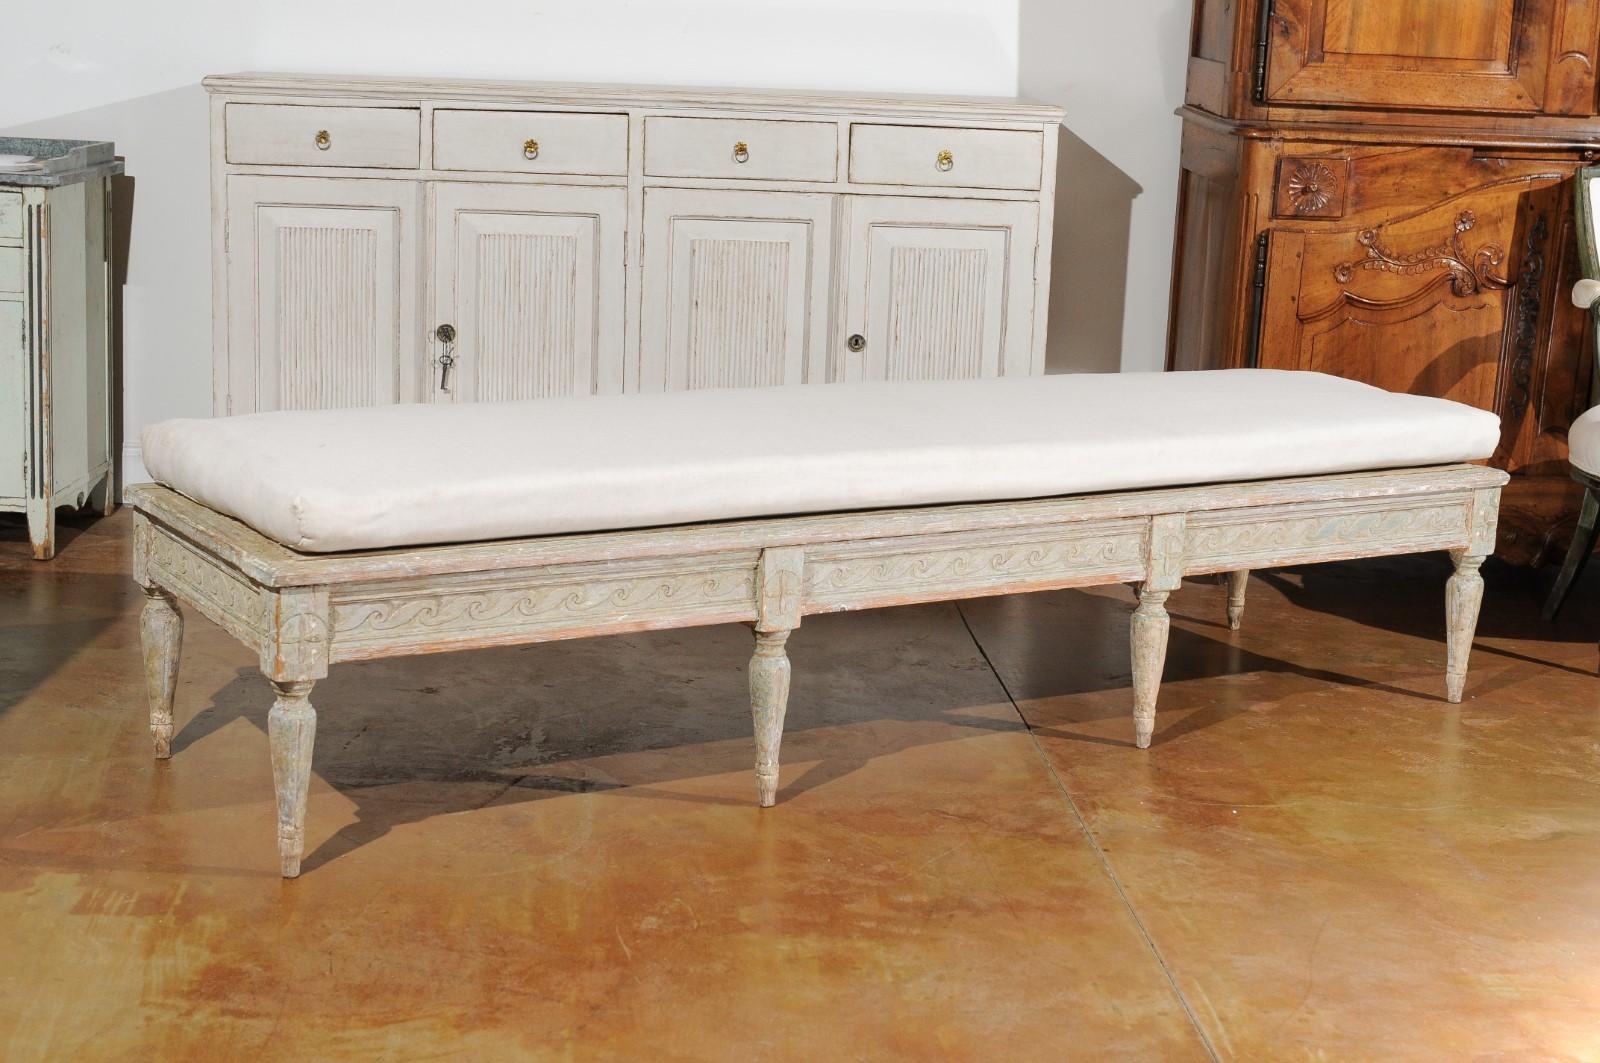 A Swedish Gustavian period painted wood bench from the late 18th century, with Vitruvian scroll frieze and distressed patina. Created in Sweden during the last decade of the 18th century, this Gustavian bench features a long upholstered seat,